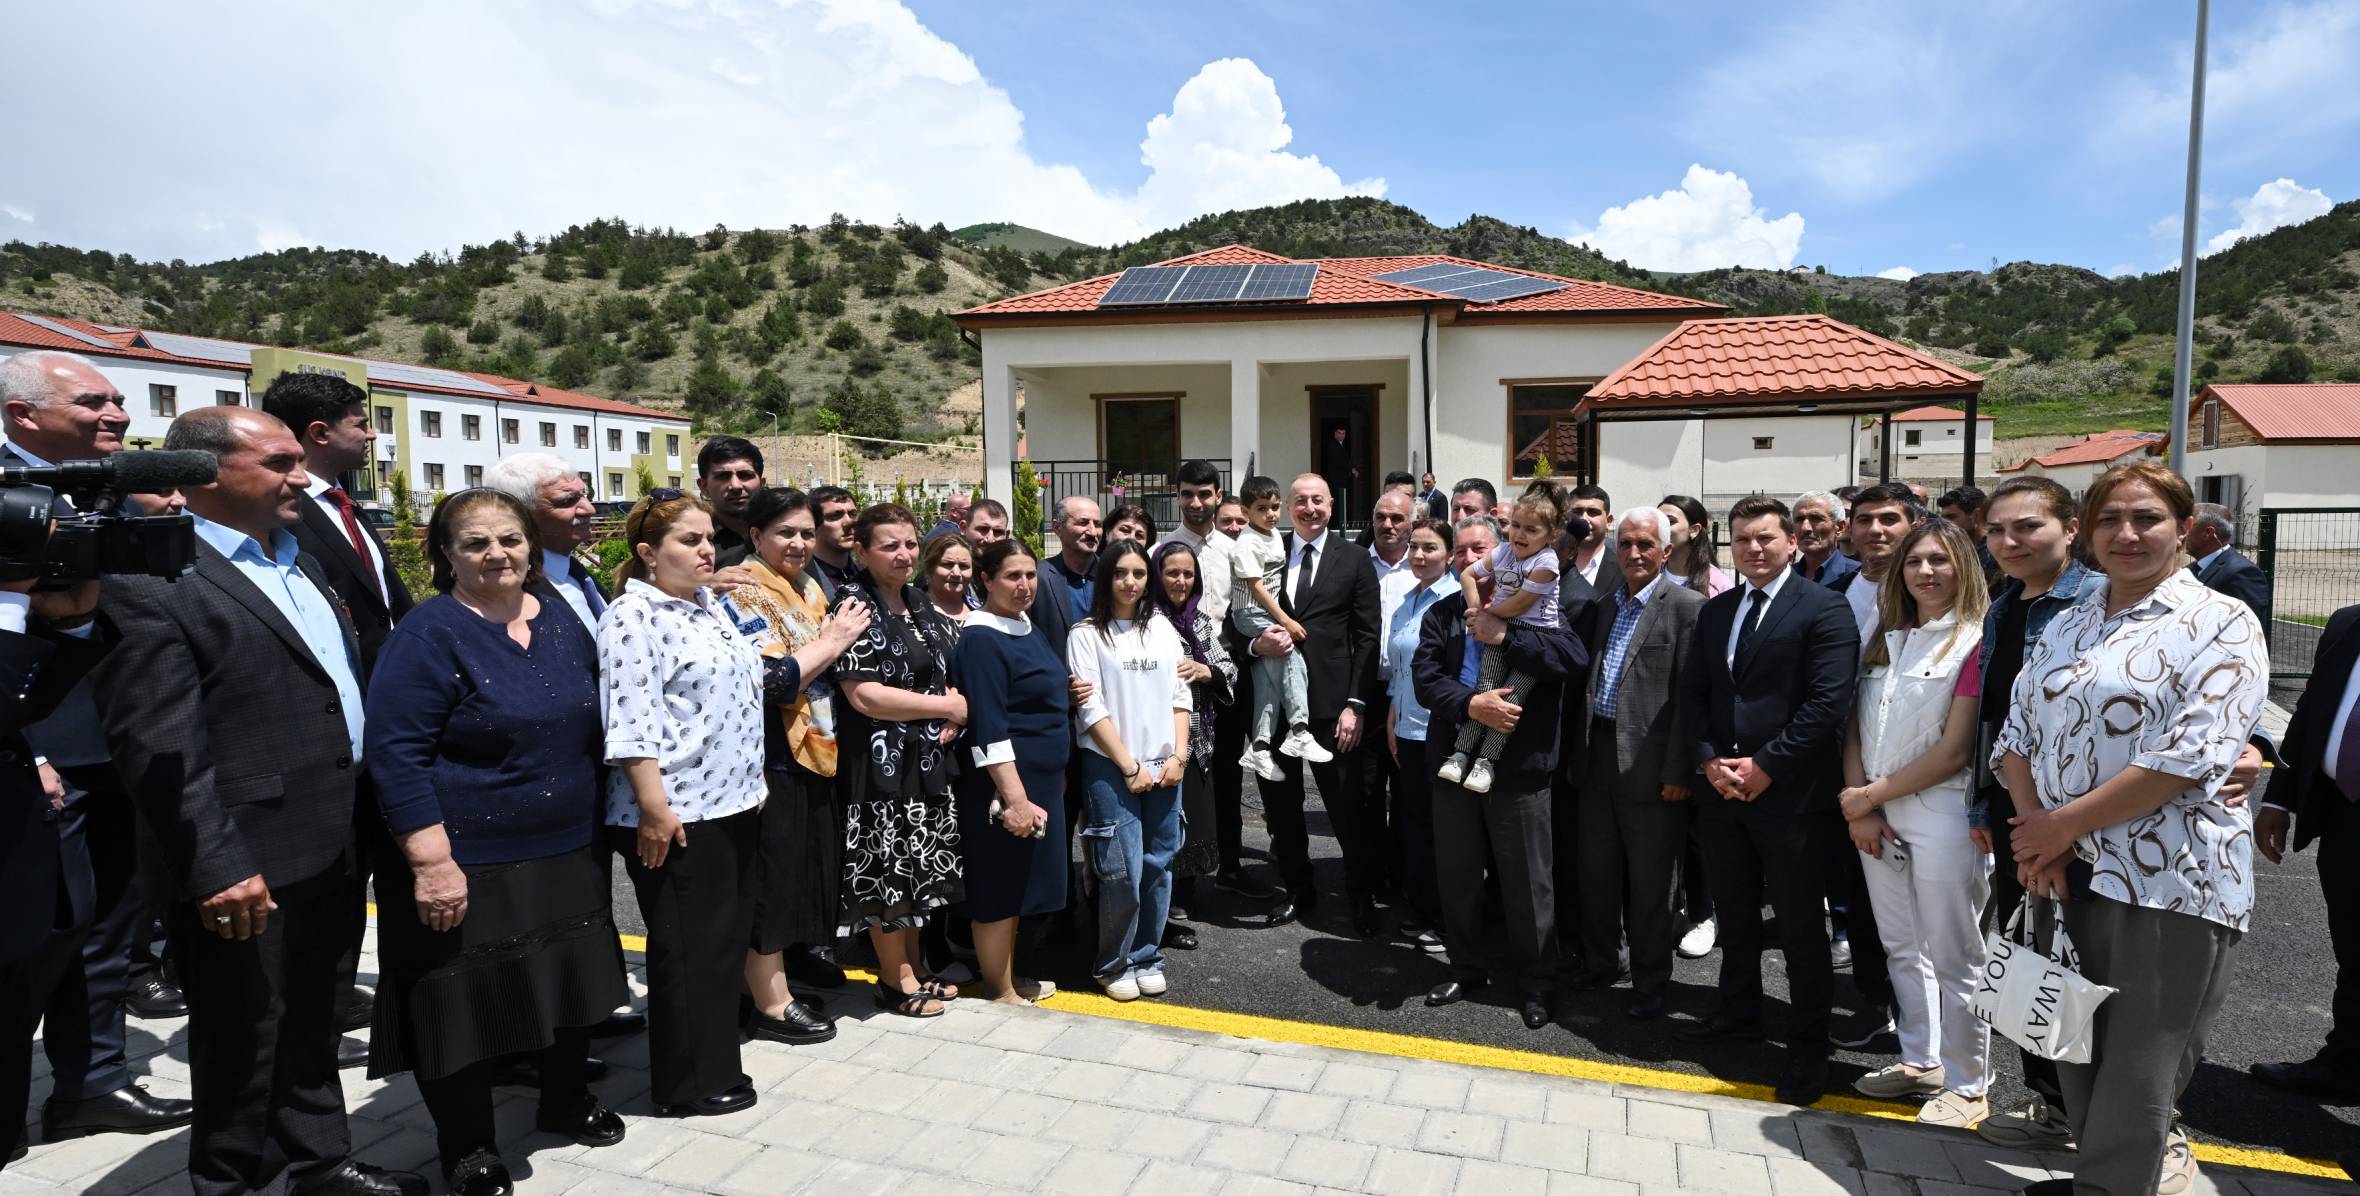 Ilham Aliyev met with residents who had relocated to Sus village in Lachin district and participated in inauguration of small hydropower stations